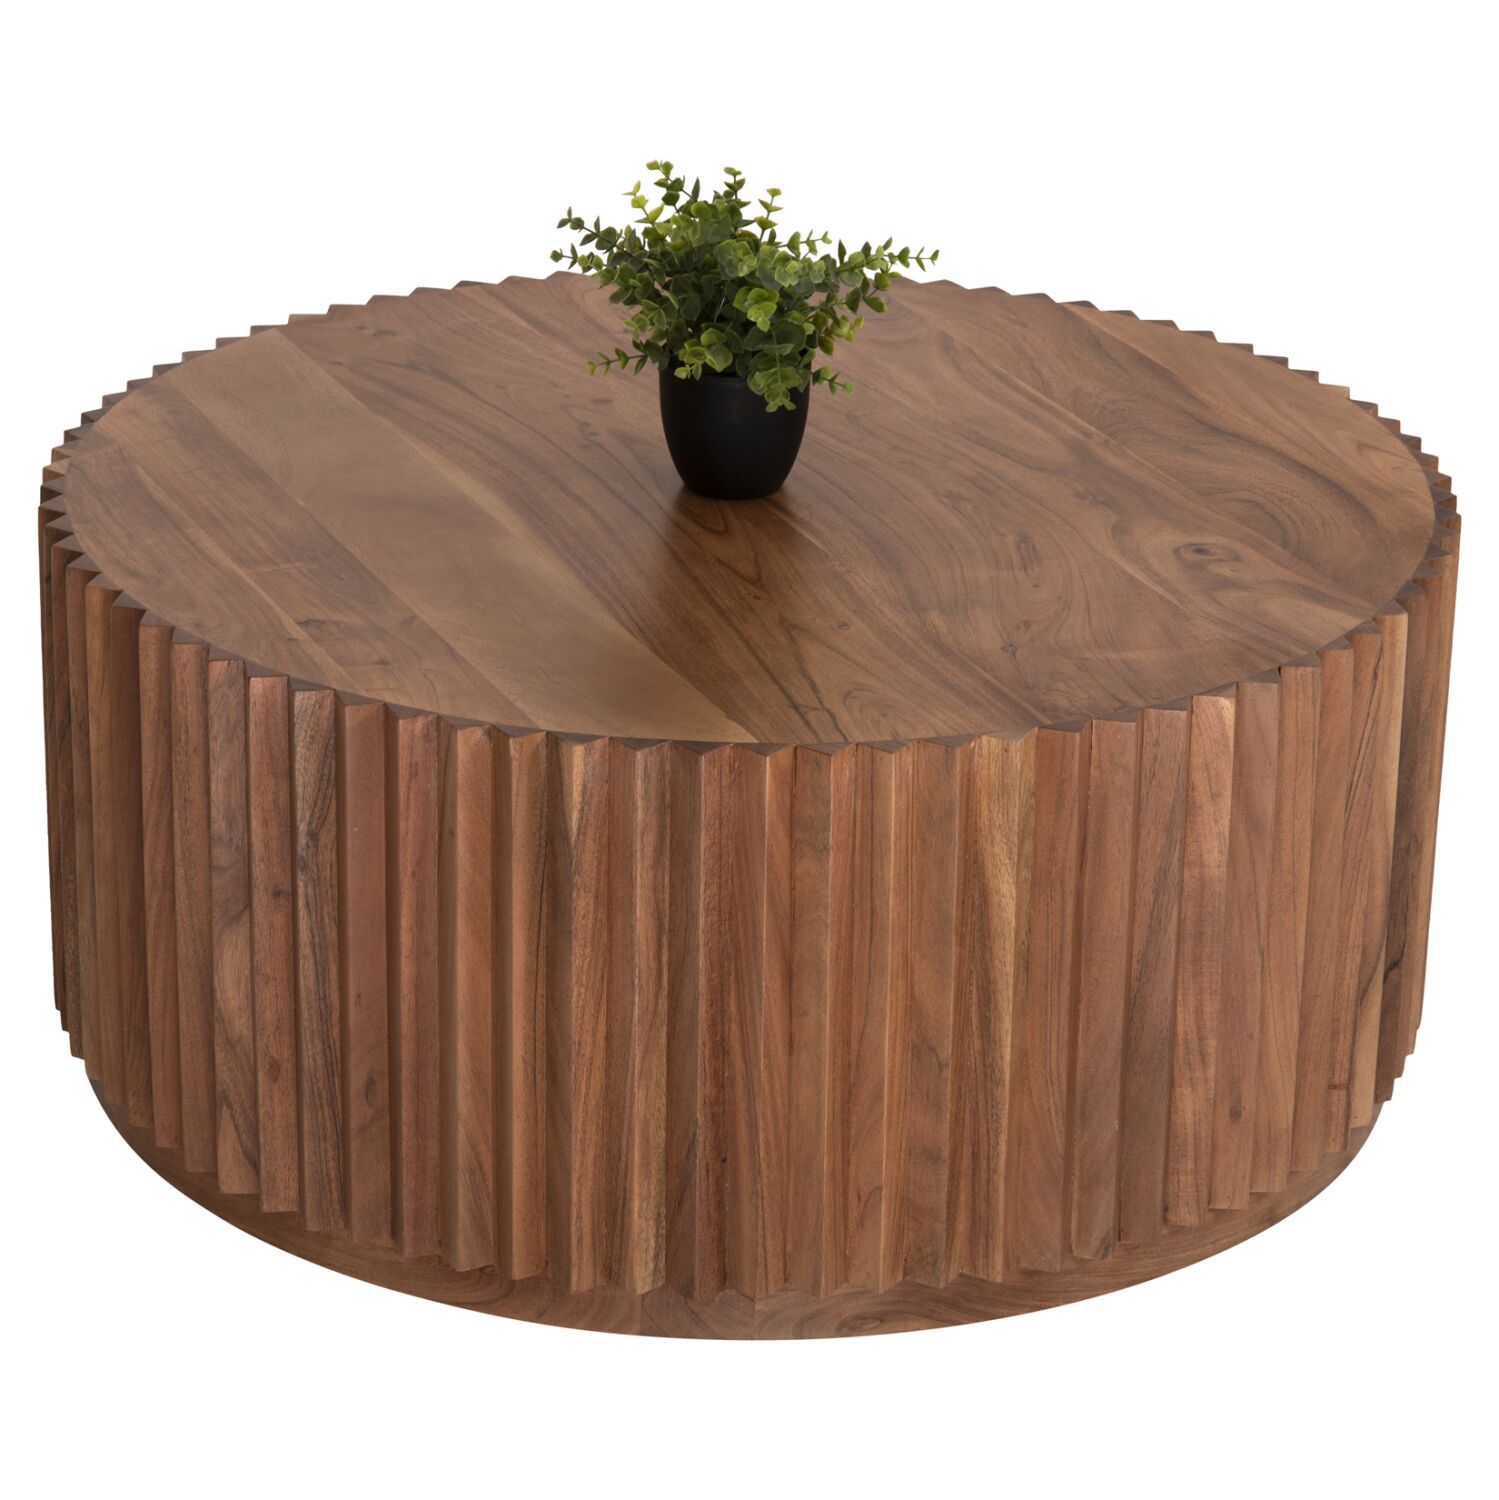 COFFEE TABLE ROUND SEDGE HM9695 SOLID ACACIA WOOD-NATURAL COLOR Φ90Χ38Hcm.